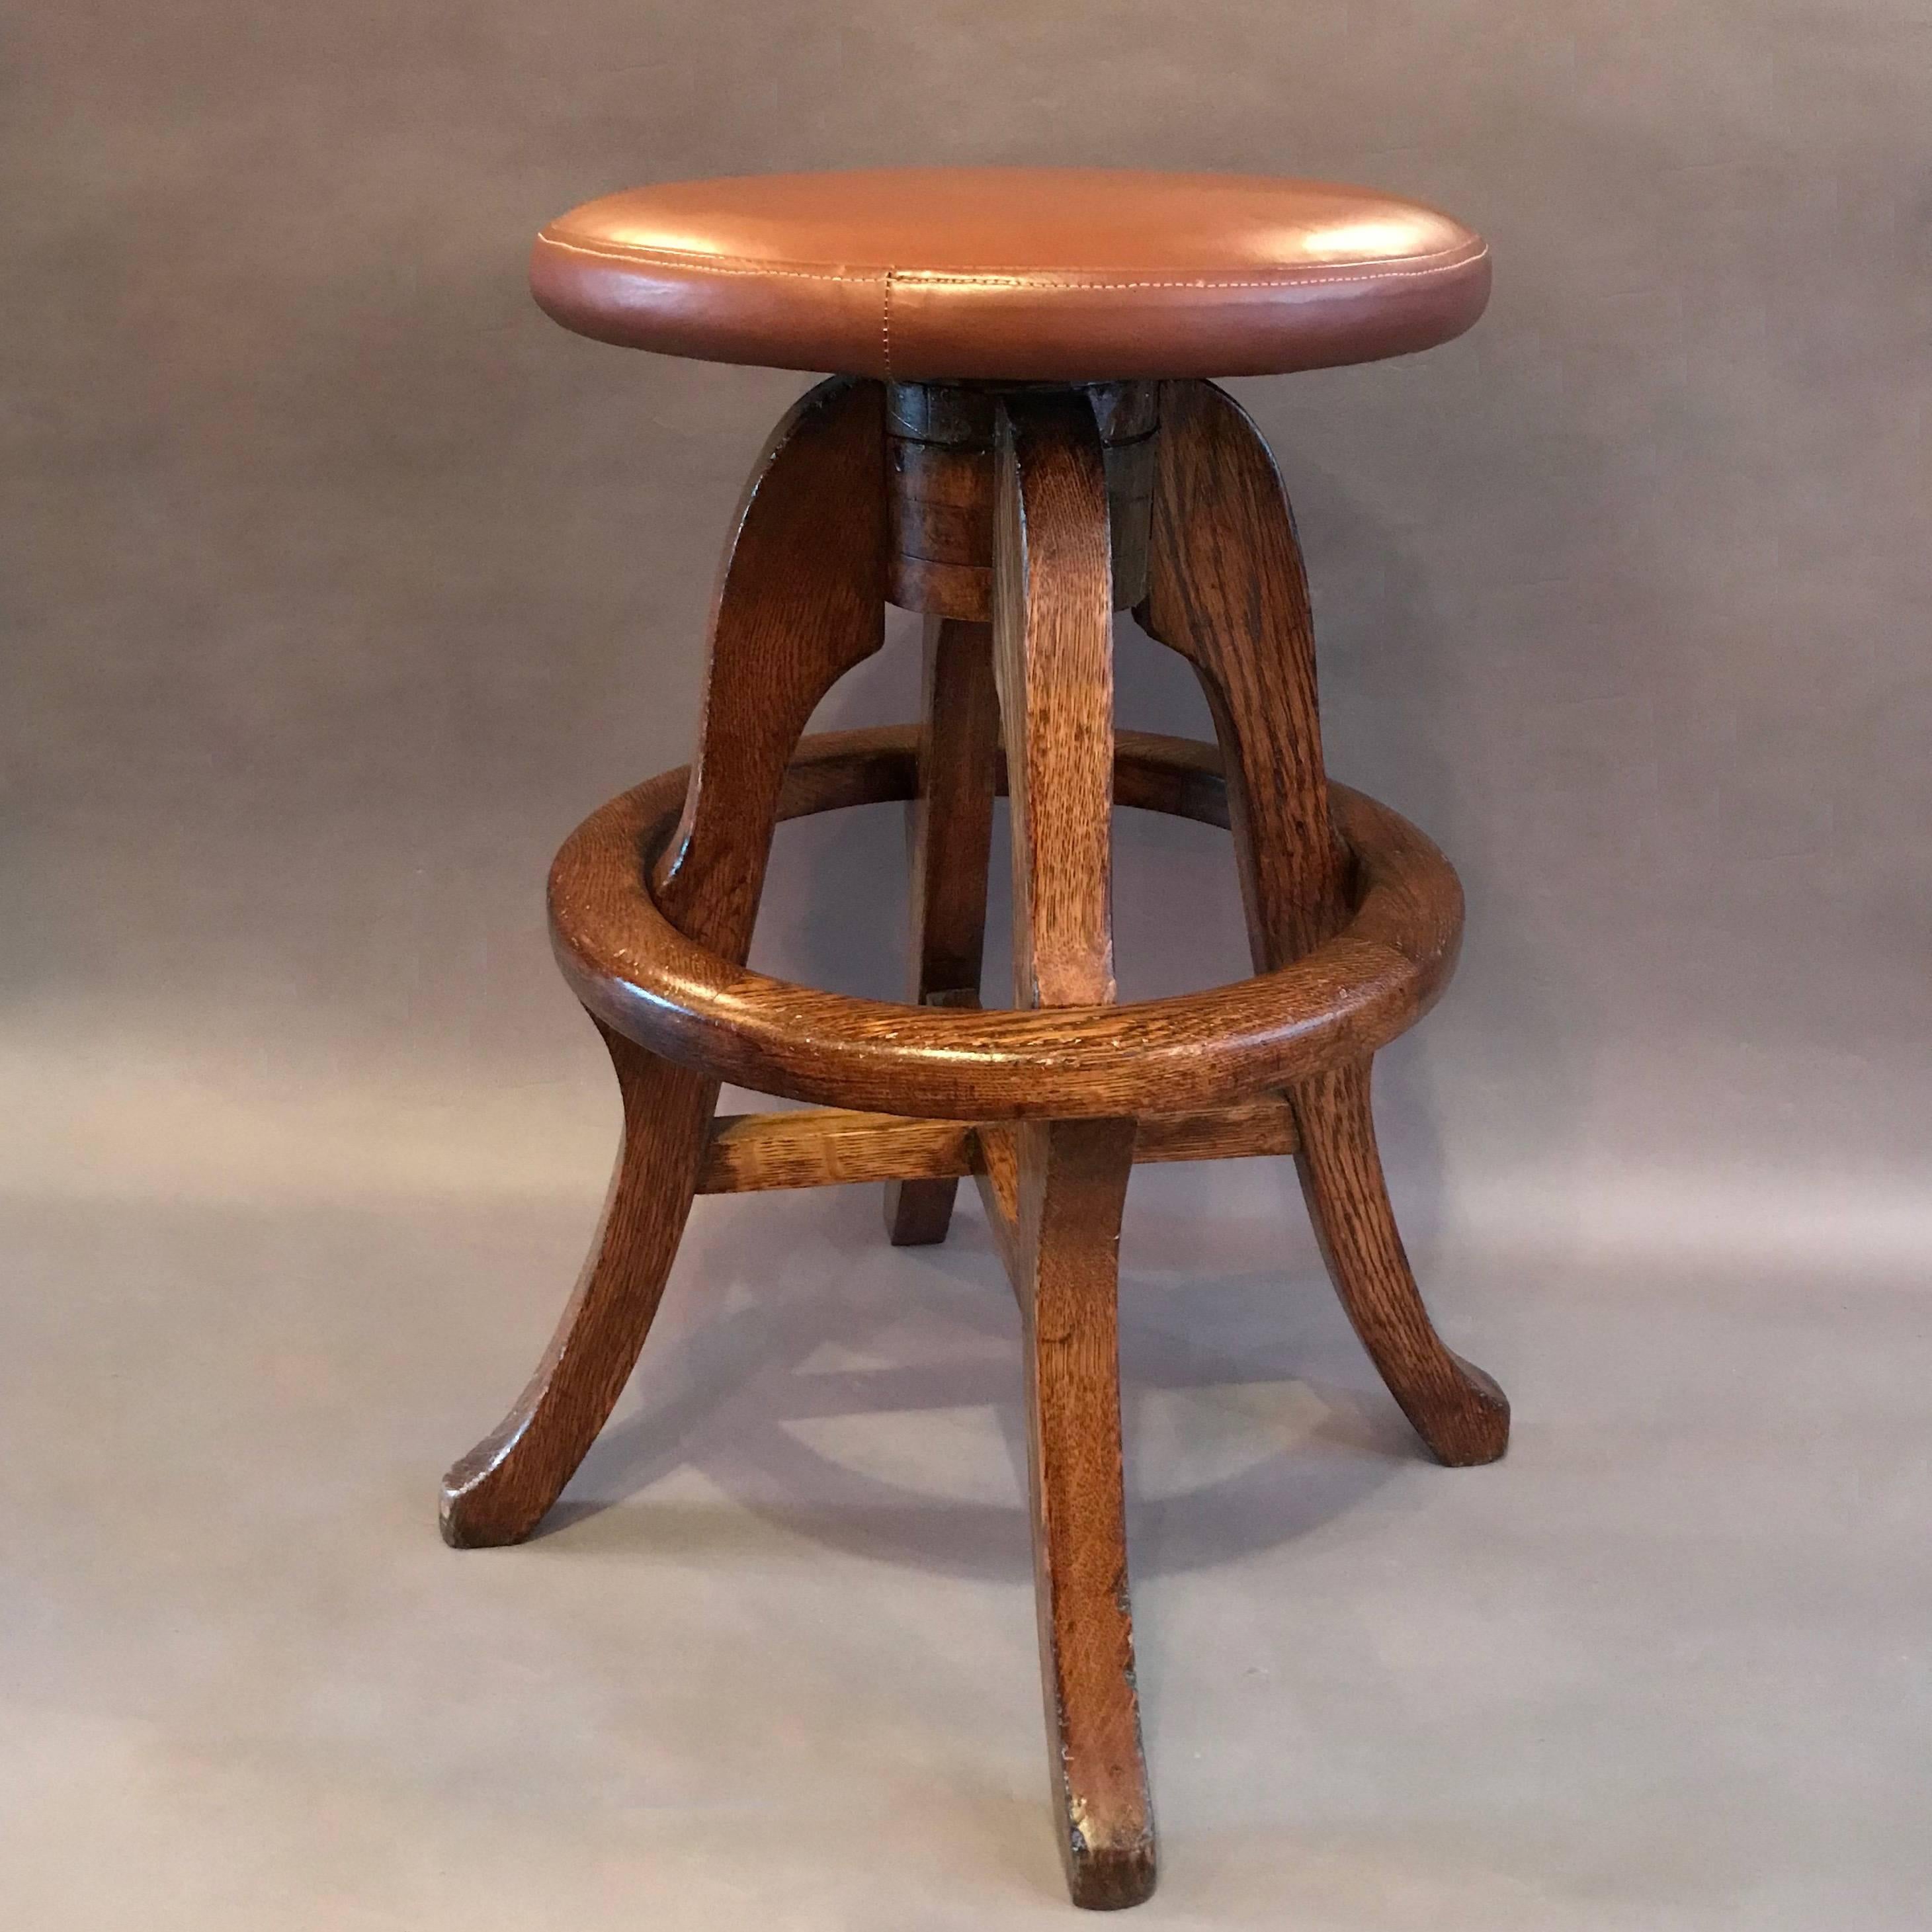 1930's, solid oak, workshop stool with newly upholstered caramel brown leather seat. The diameter of the seat is 14in and the foot ring is 13in high.